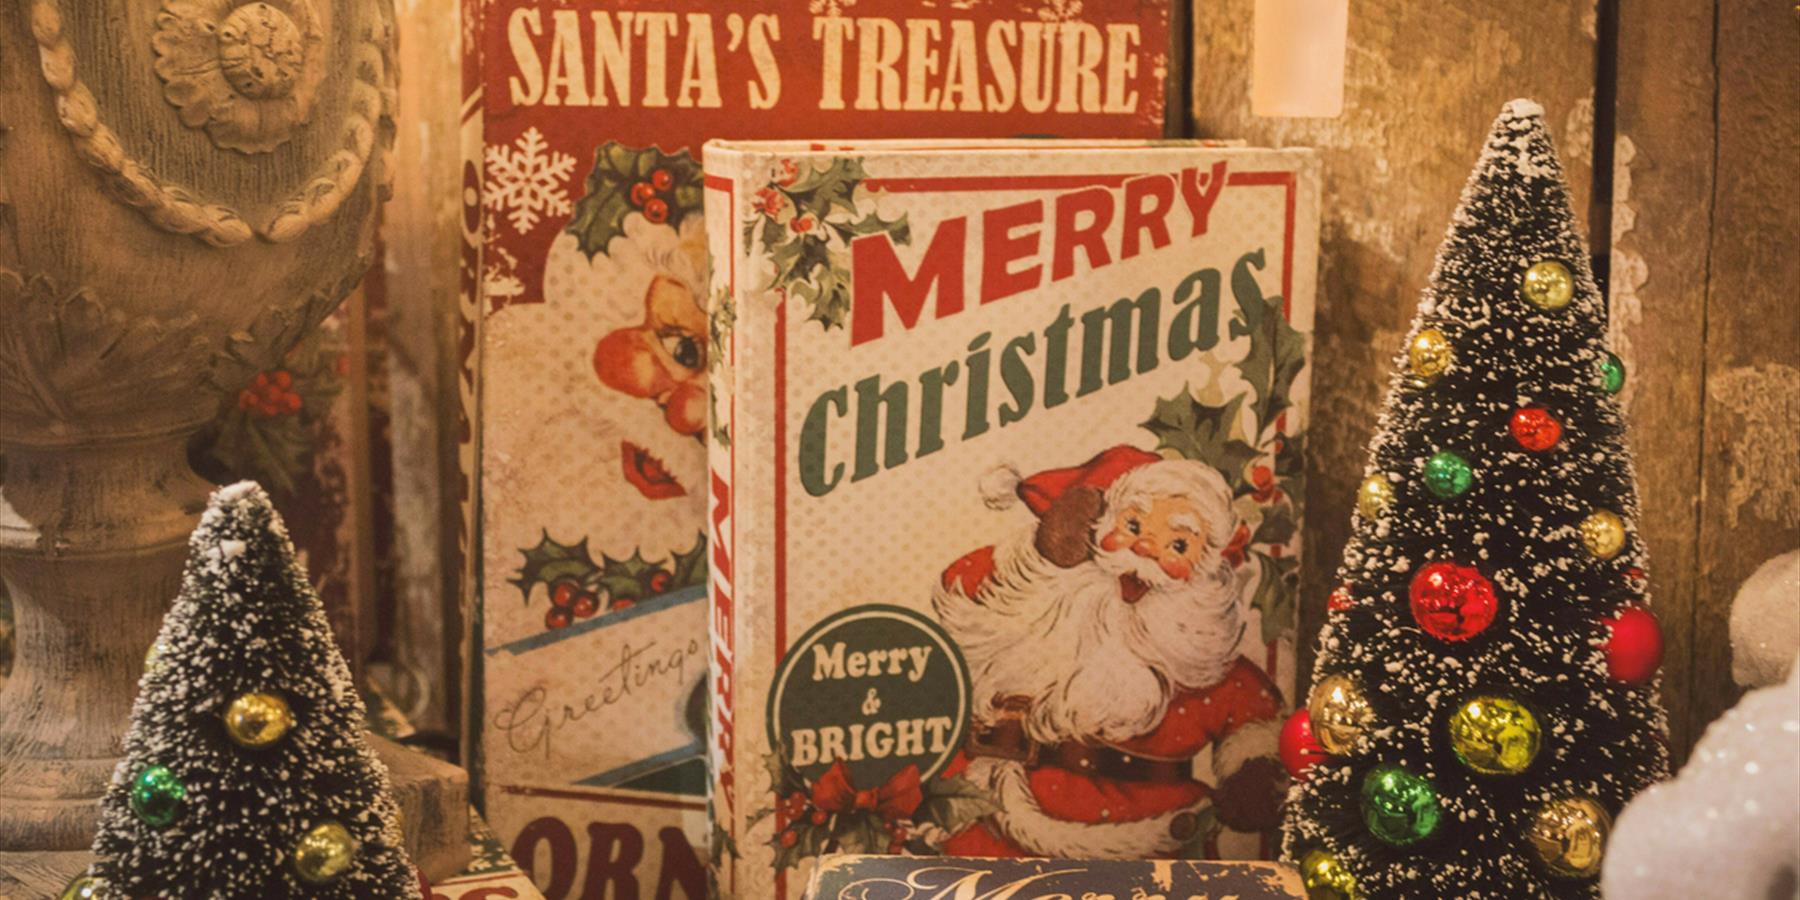 Books with Santa on the front and two tiny Christmas trees